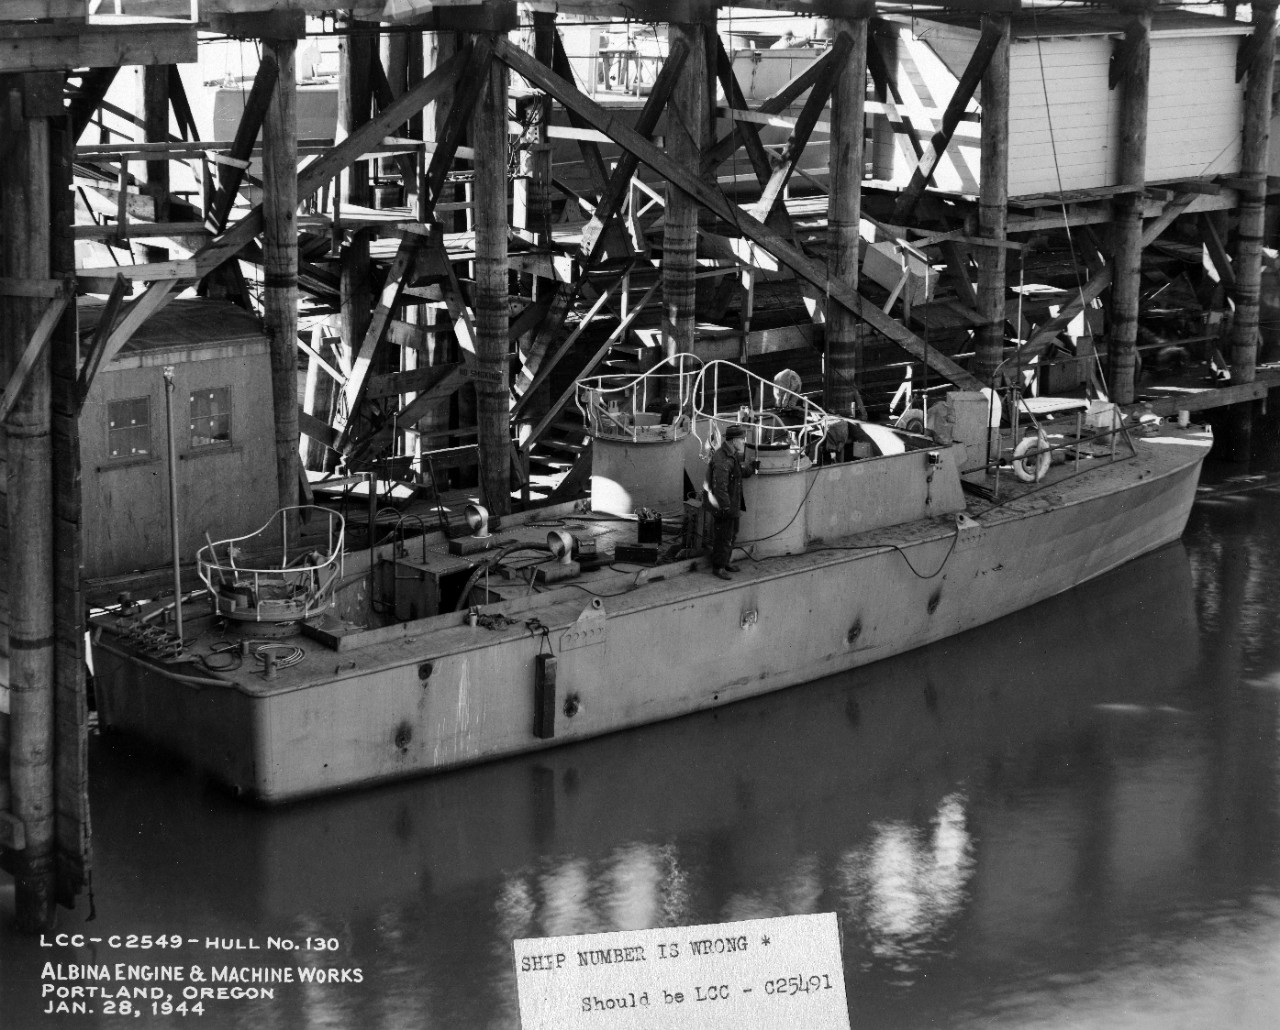 USS LCC-C25491 fitting out at the Albina Engine and Machine Works, Portland, Oregon, 28 January 1944.